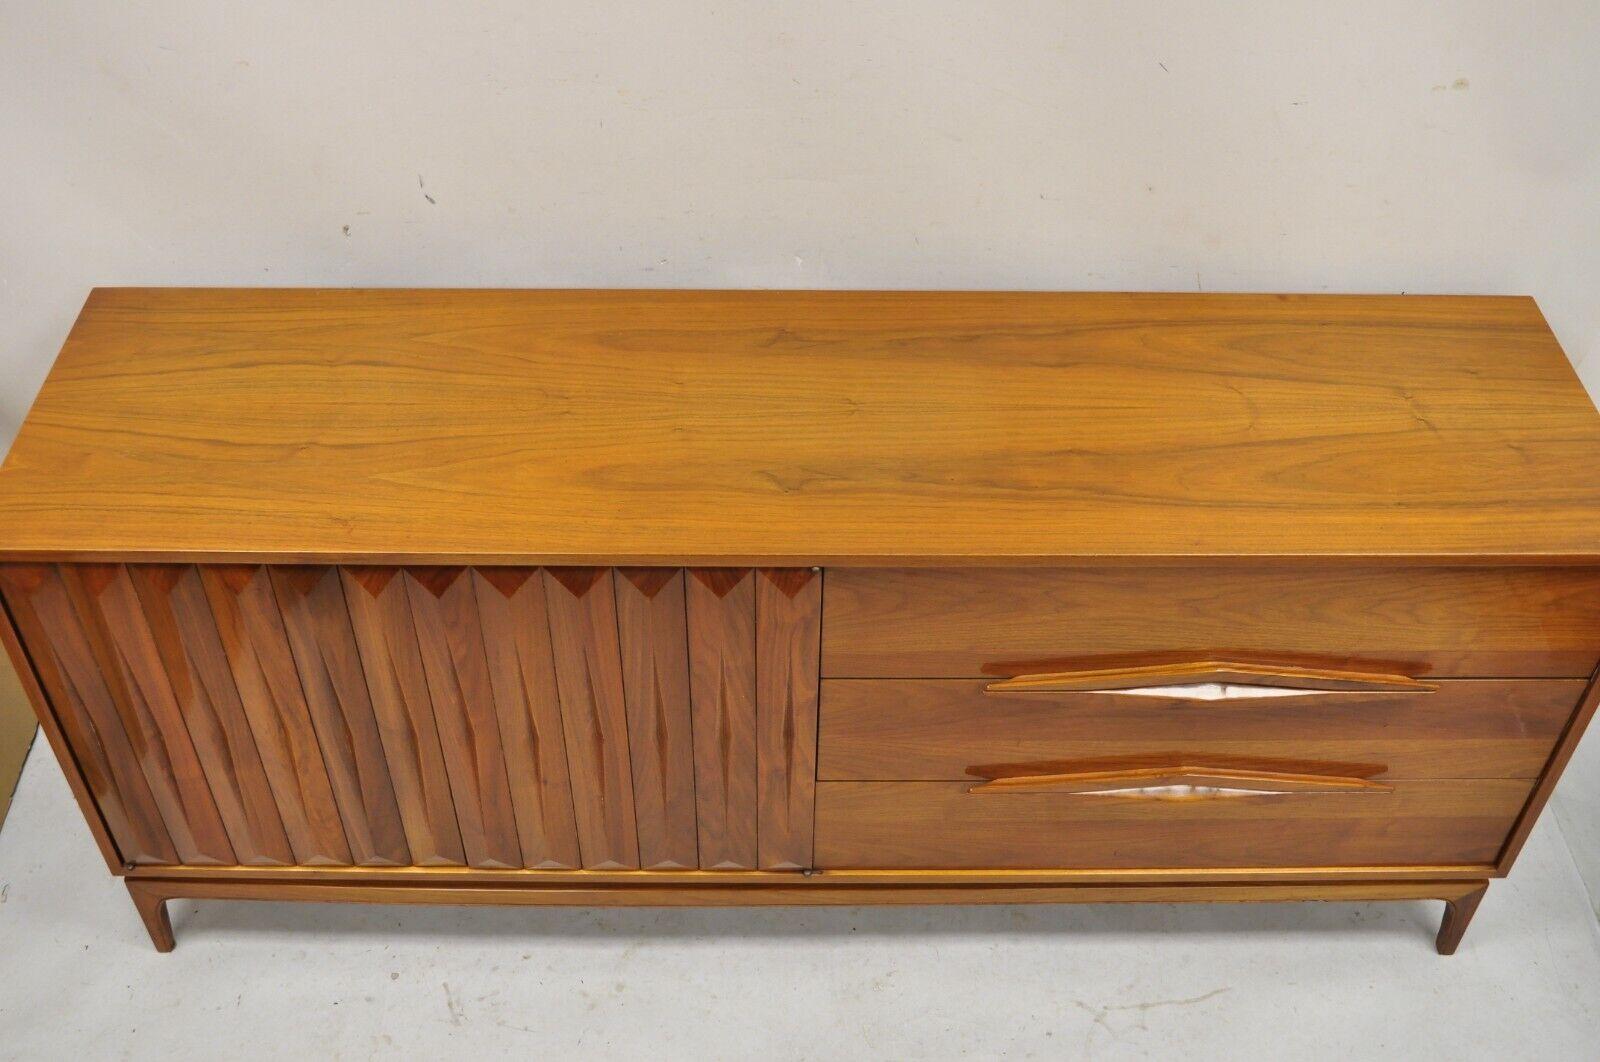 Vintage Mid Century Danish Modern Sculpted Walnut Long Dresser Credenza. Item features six dovetailed drawers, two spring operated doors, sculpted wood pulls, beautiful woodgrain, very nice vintage item. Circa 1960's. Measurements: 32